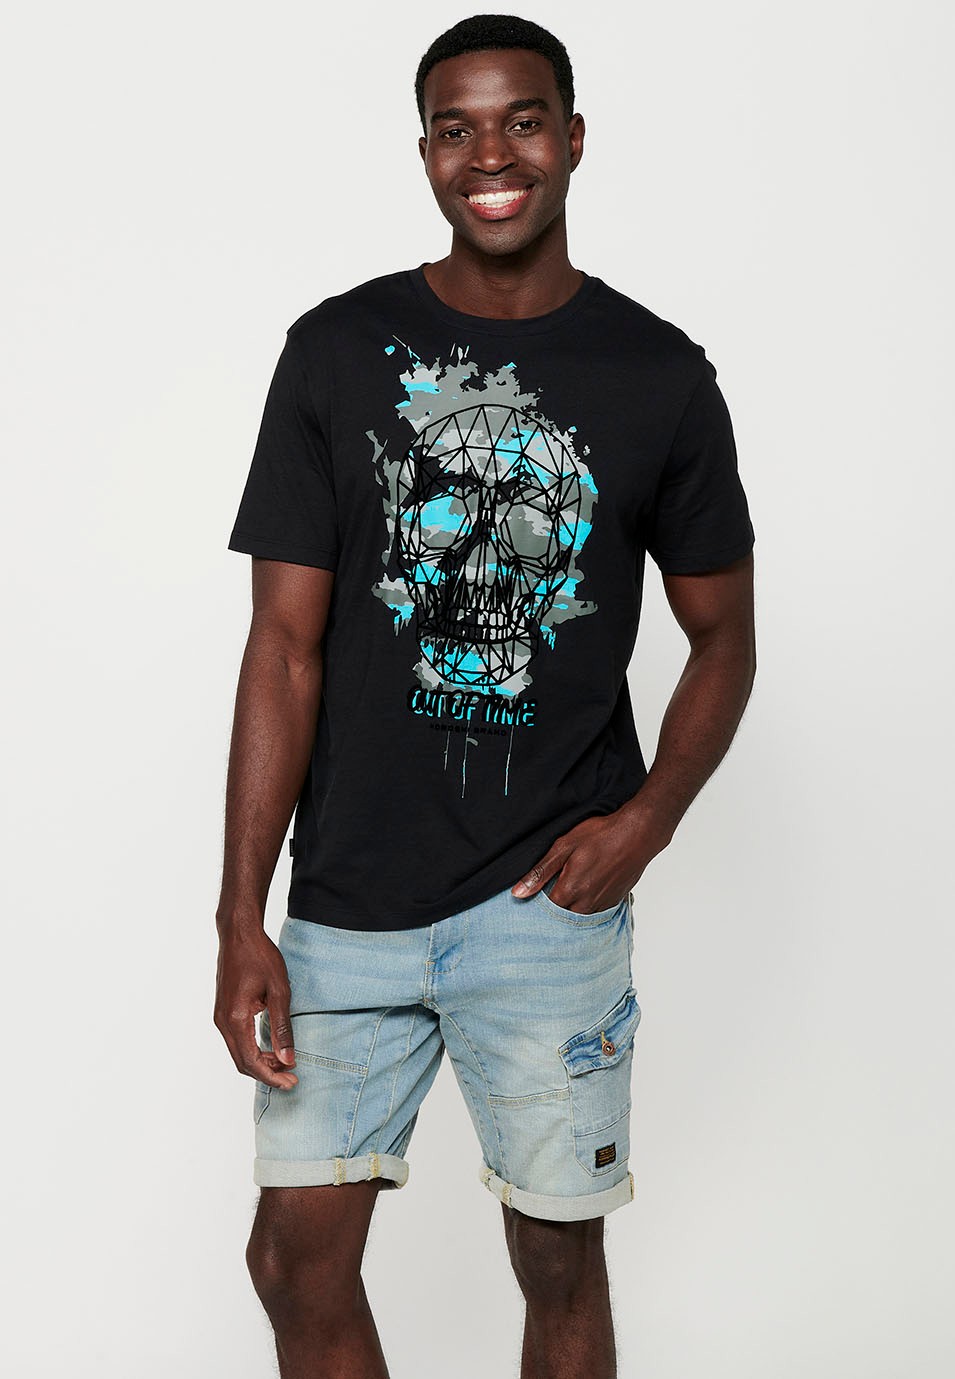 Men's Black Short Sleeve T-Shirt with Front Print and Round Neck